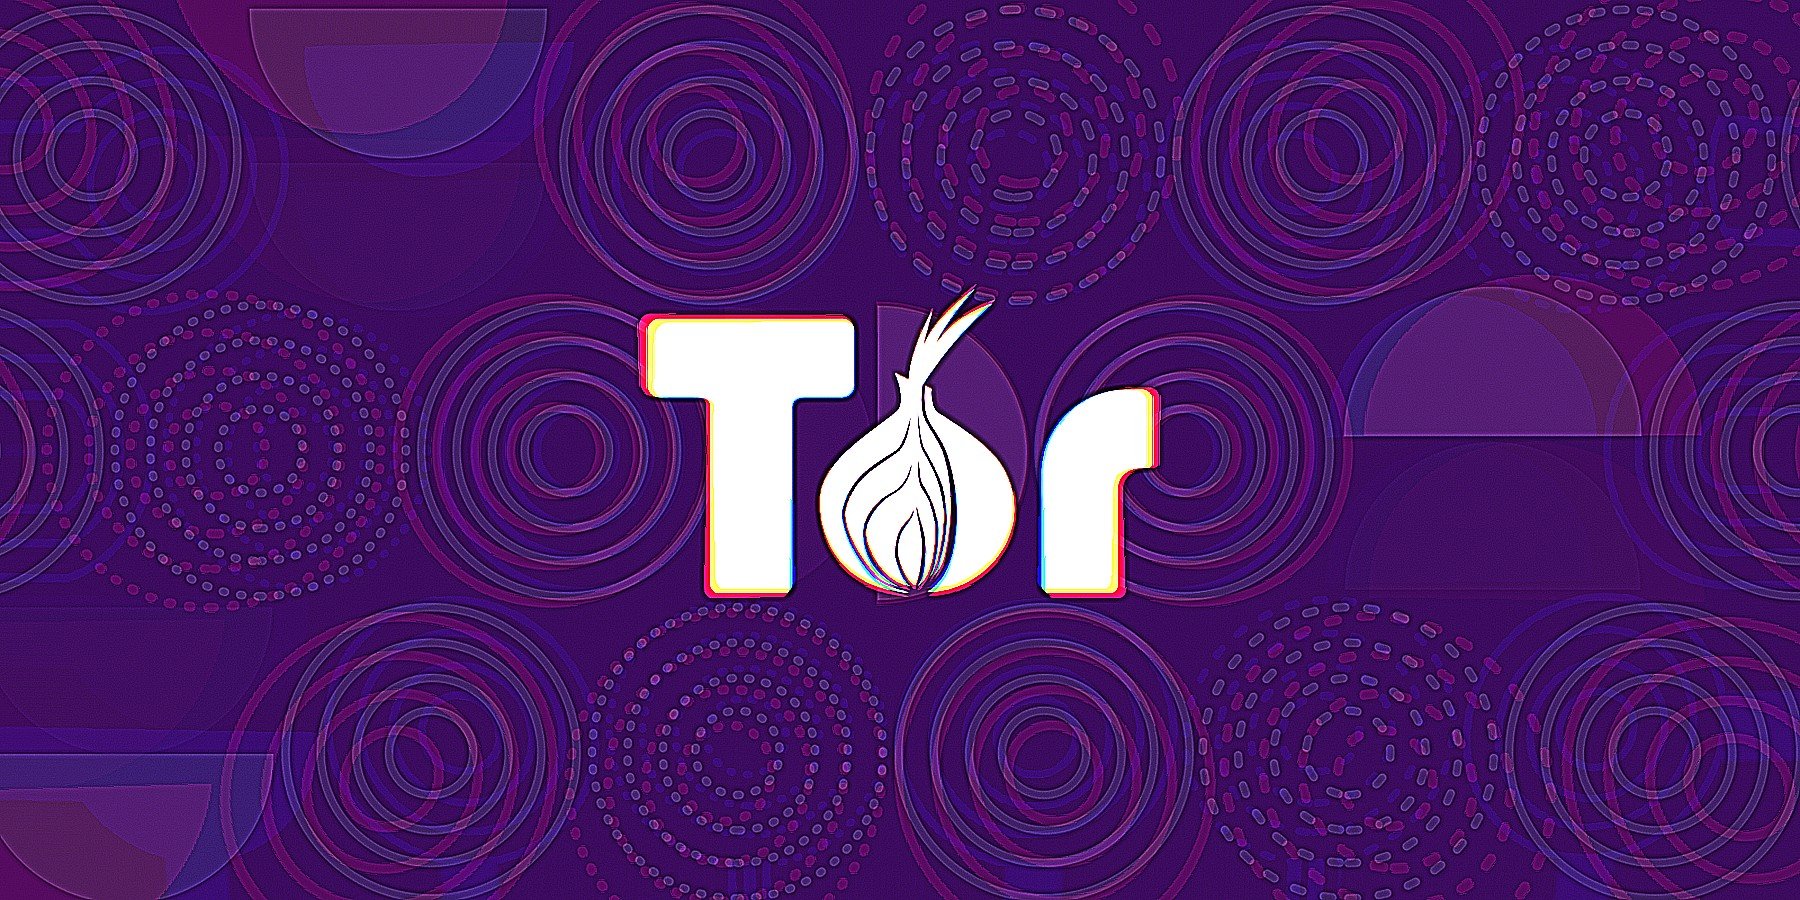 tor browser russia